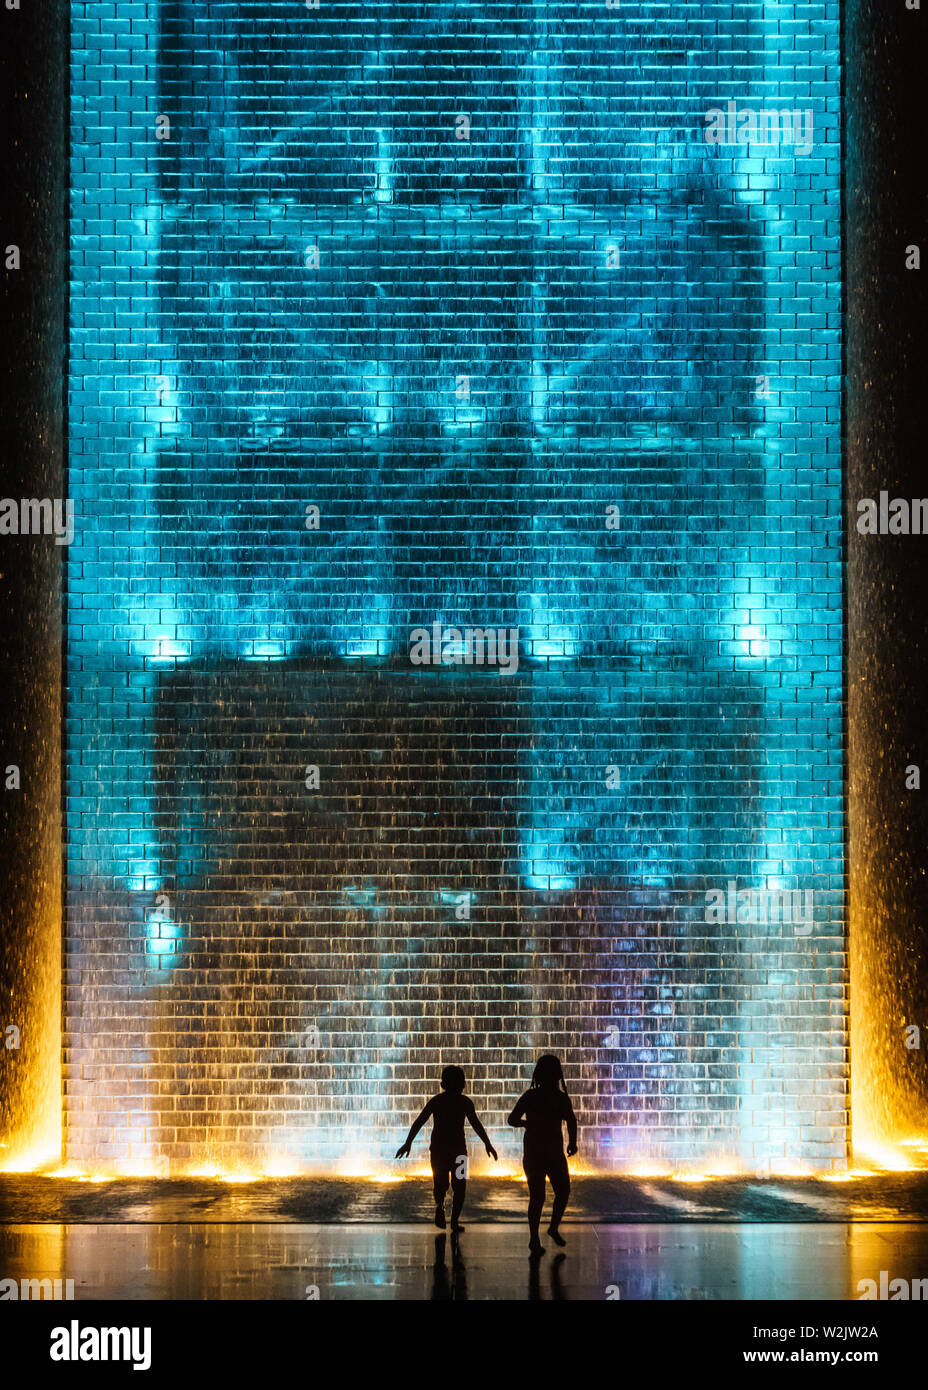 Silhouettes of two children playing near the Crown Fountain, Chicago Stock Photo